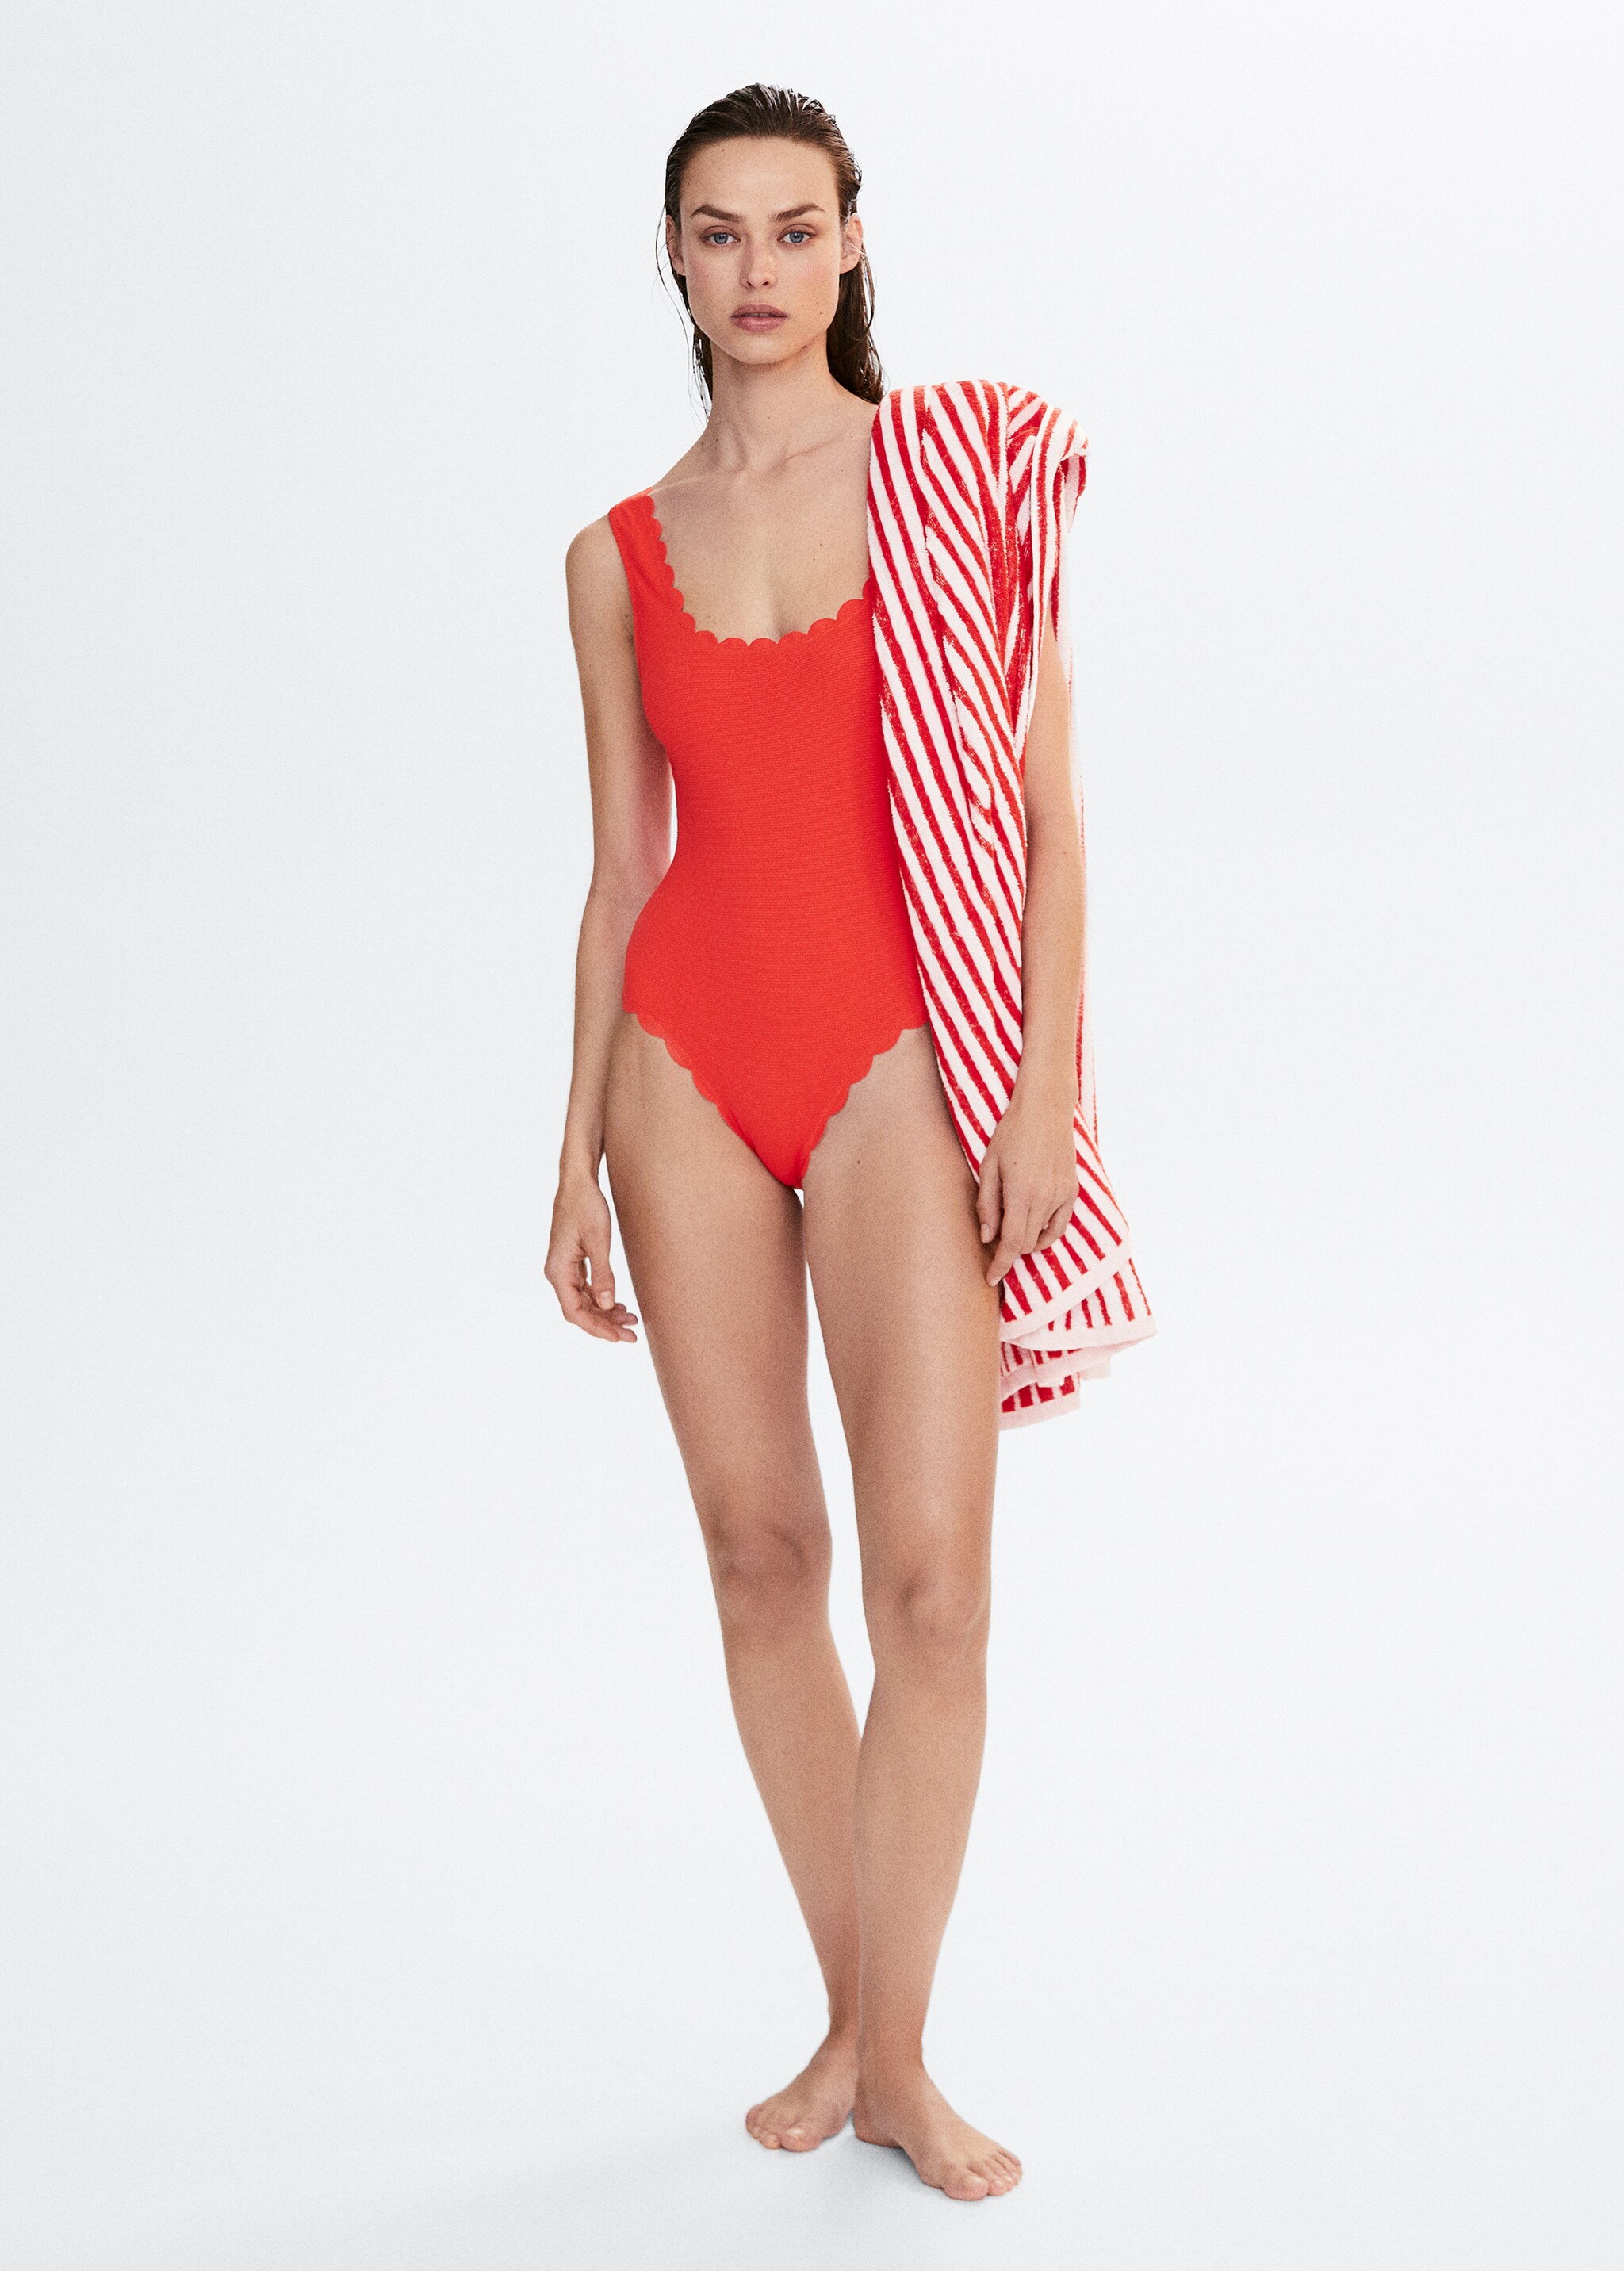 Scallop-textured swimsuit - General plane